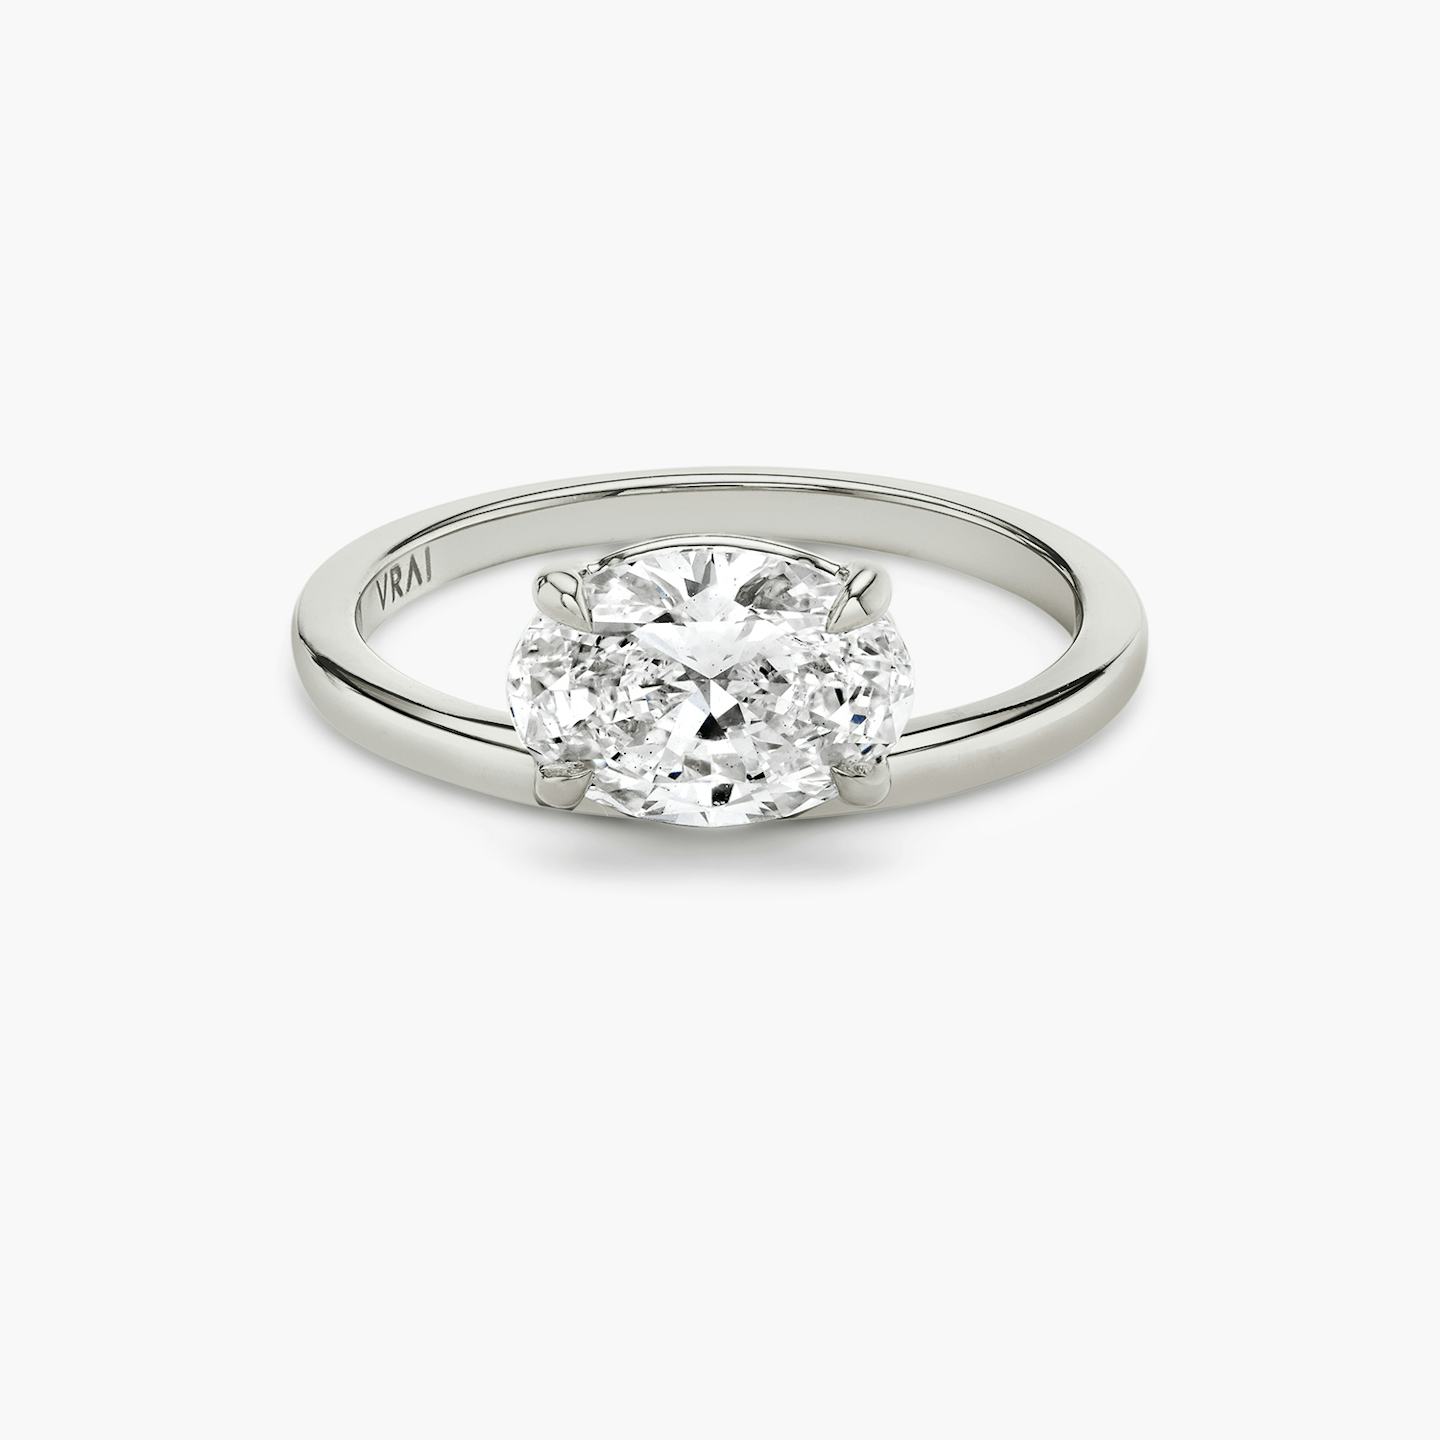 The Hover Oval Engagement Ring